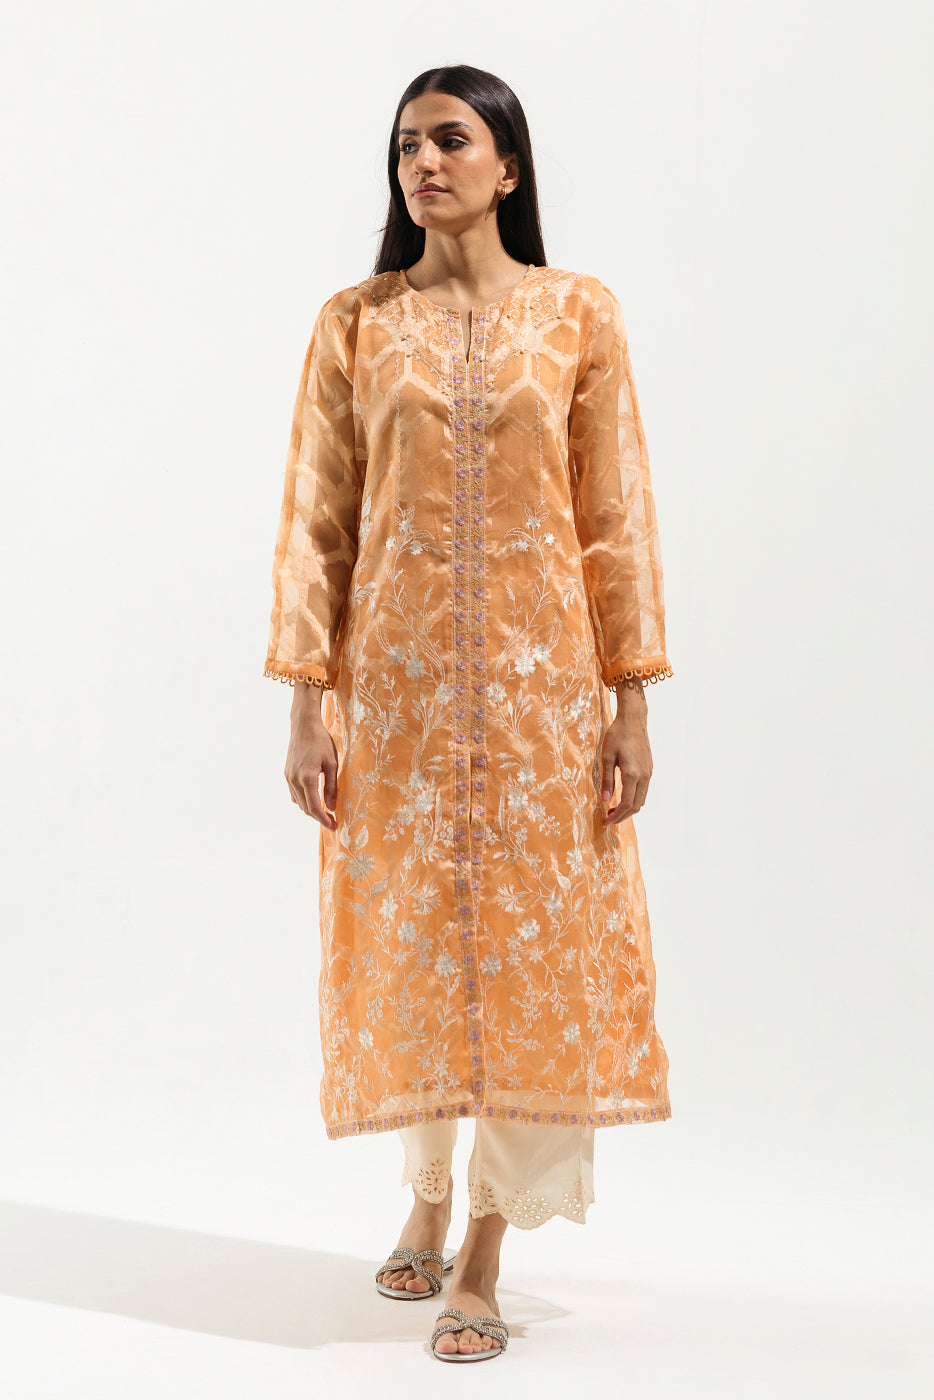 EMBROIDERED JACQUARD SHIRT (LUXURY PRET) - BEECHTREE